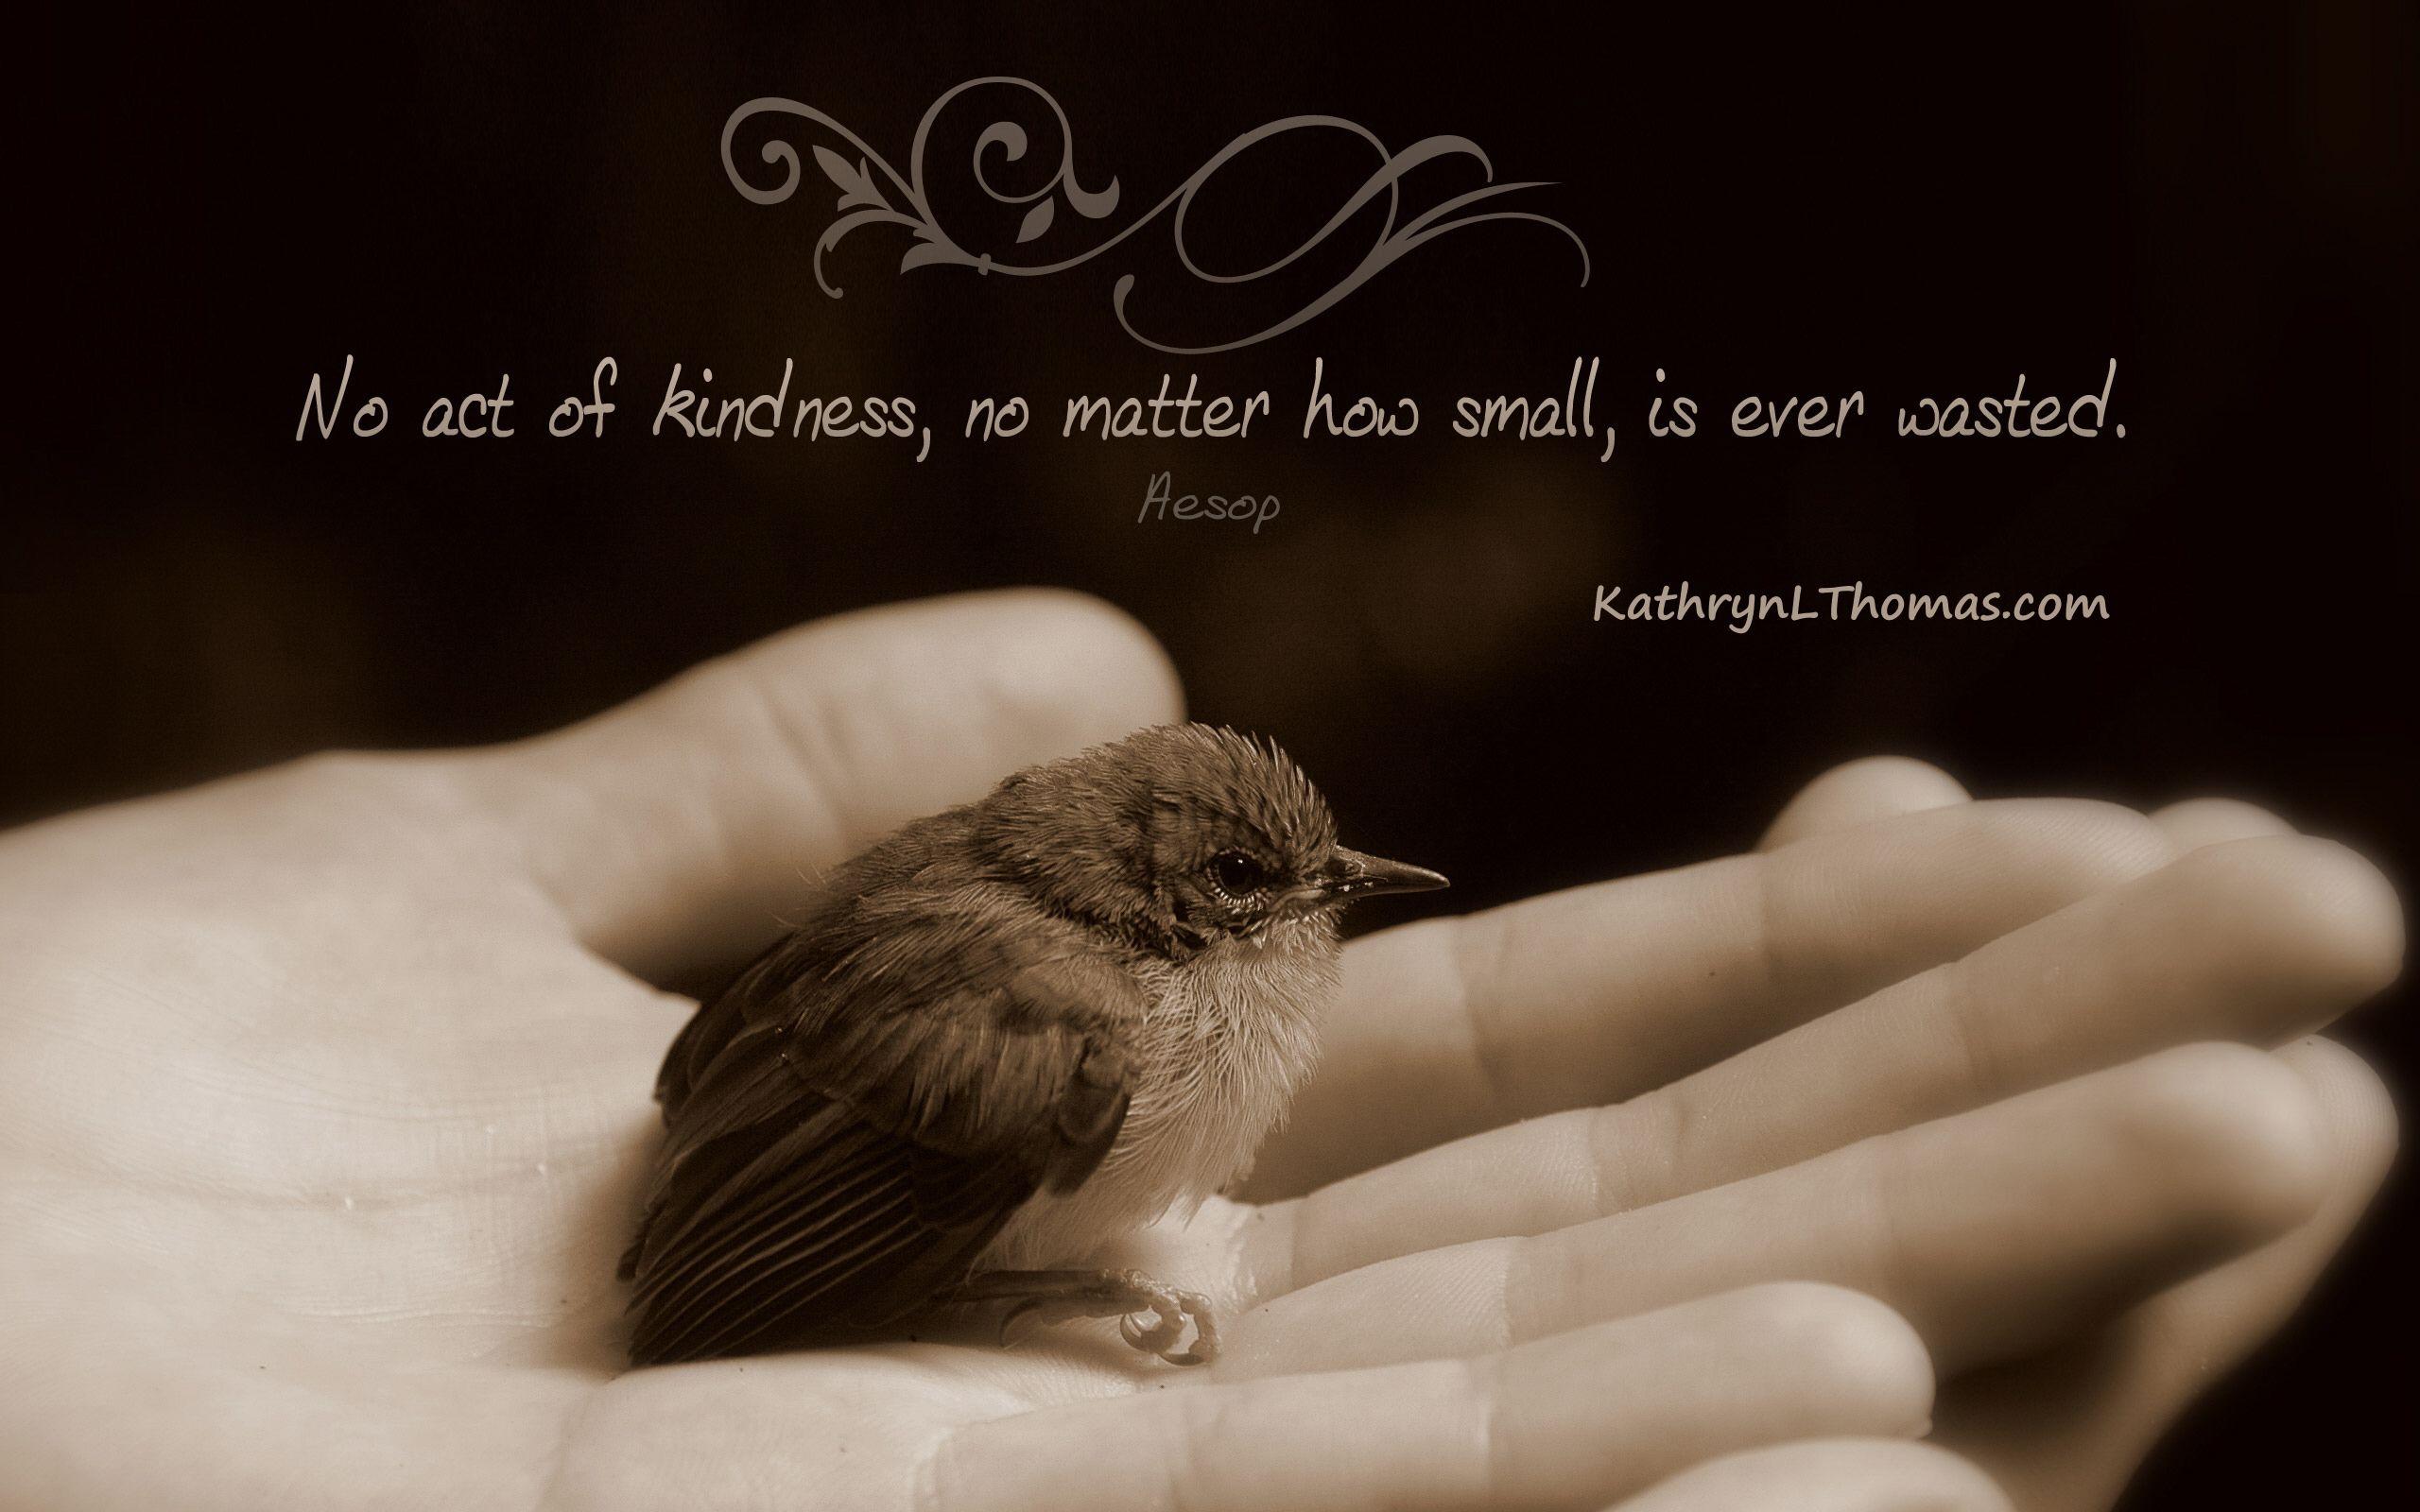 No Act of Kindness. Kathryn L Thomas